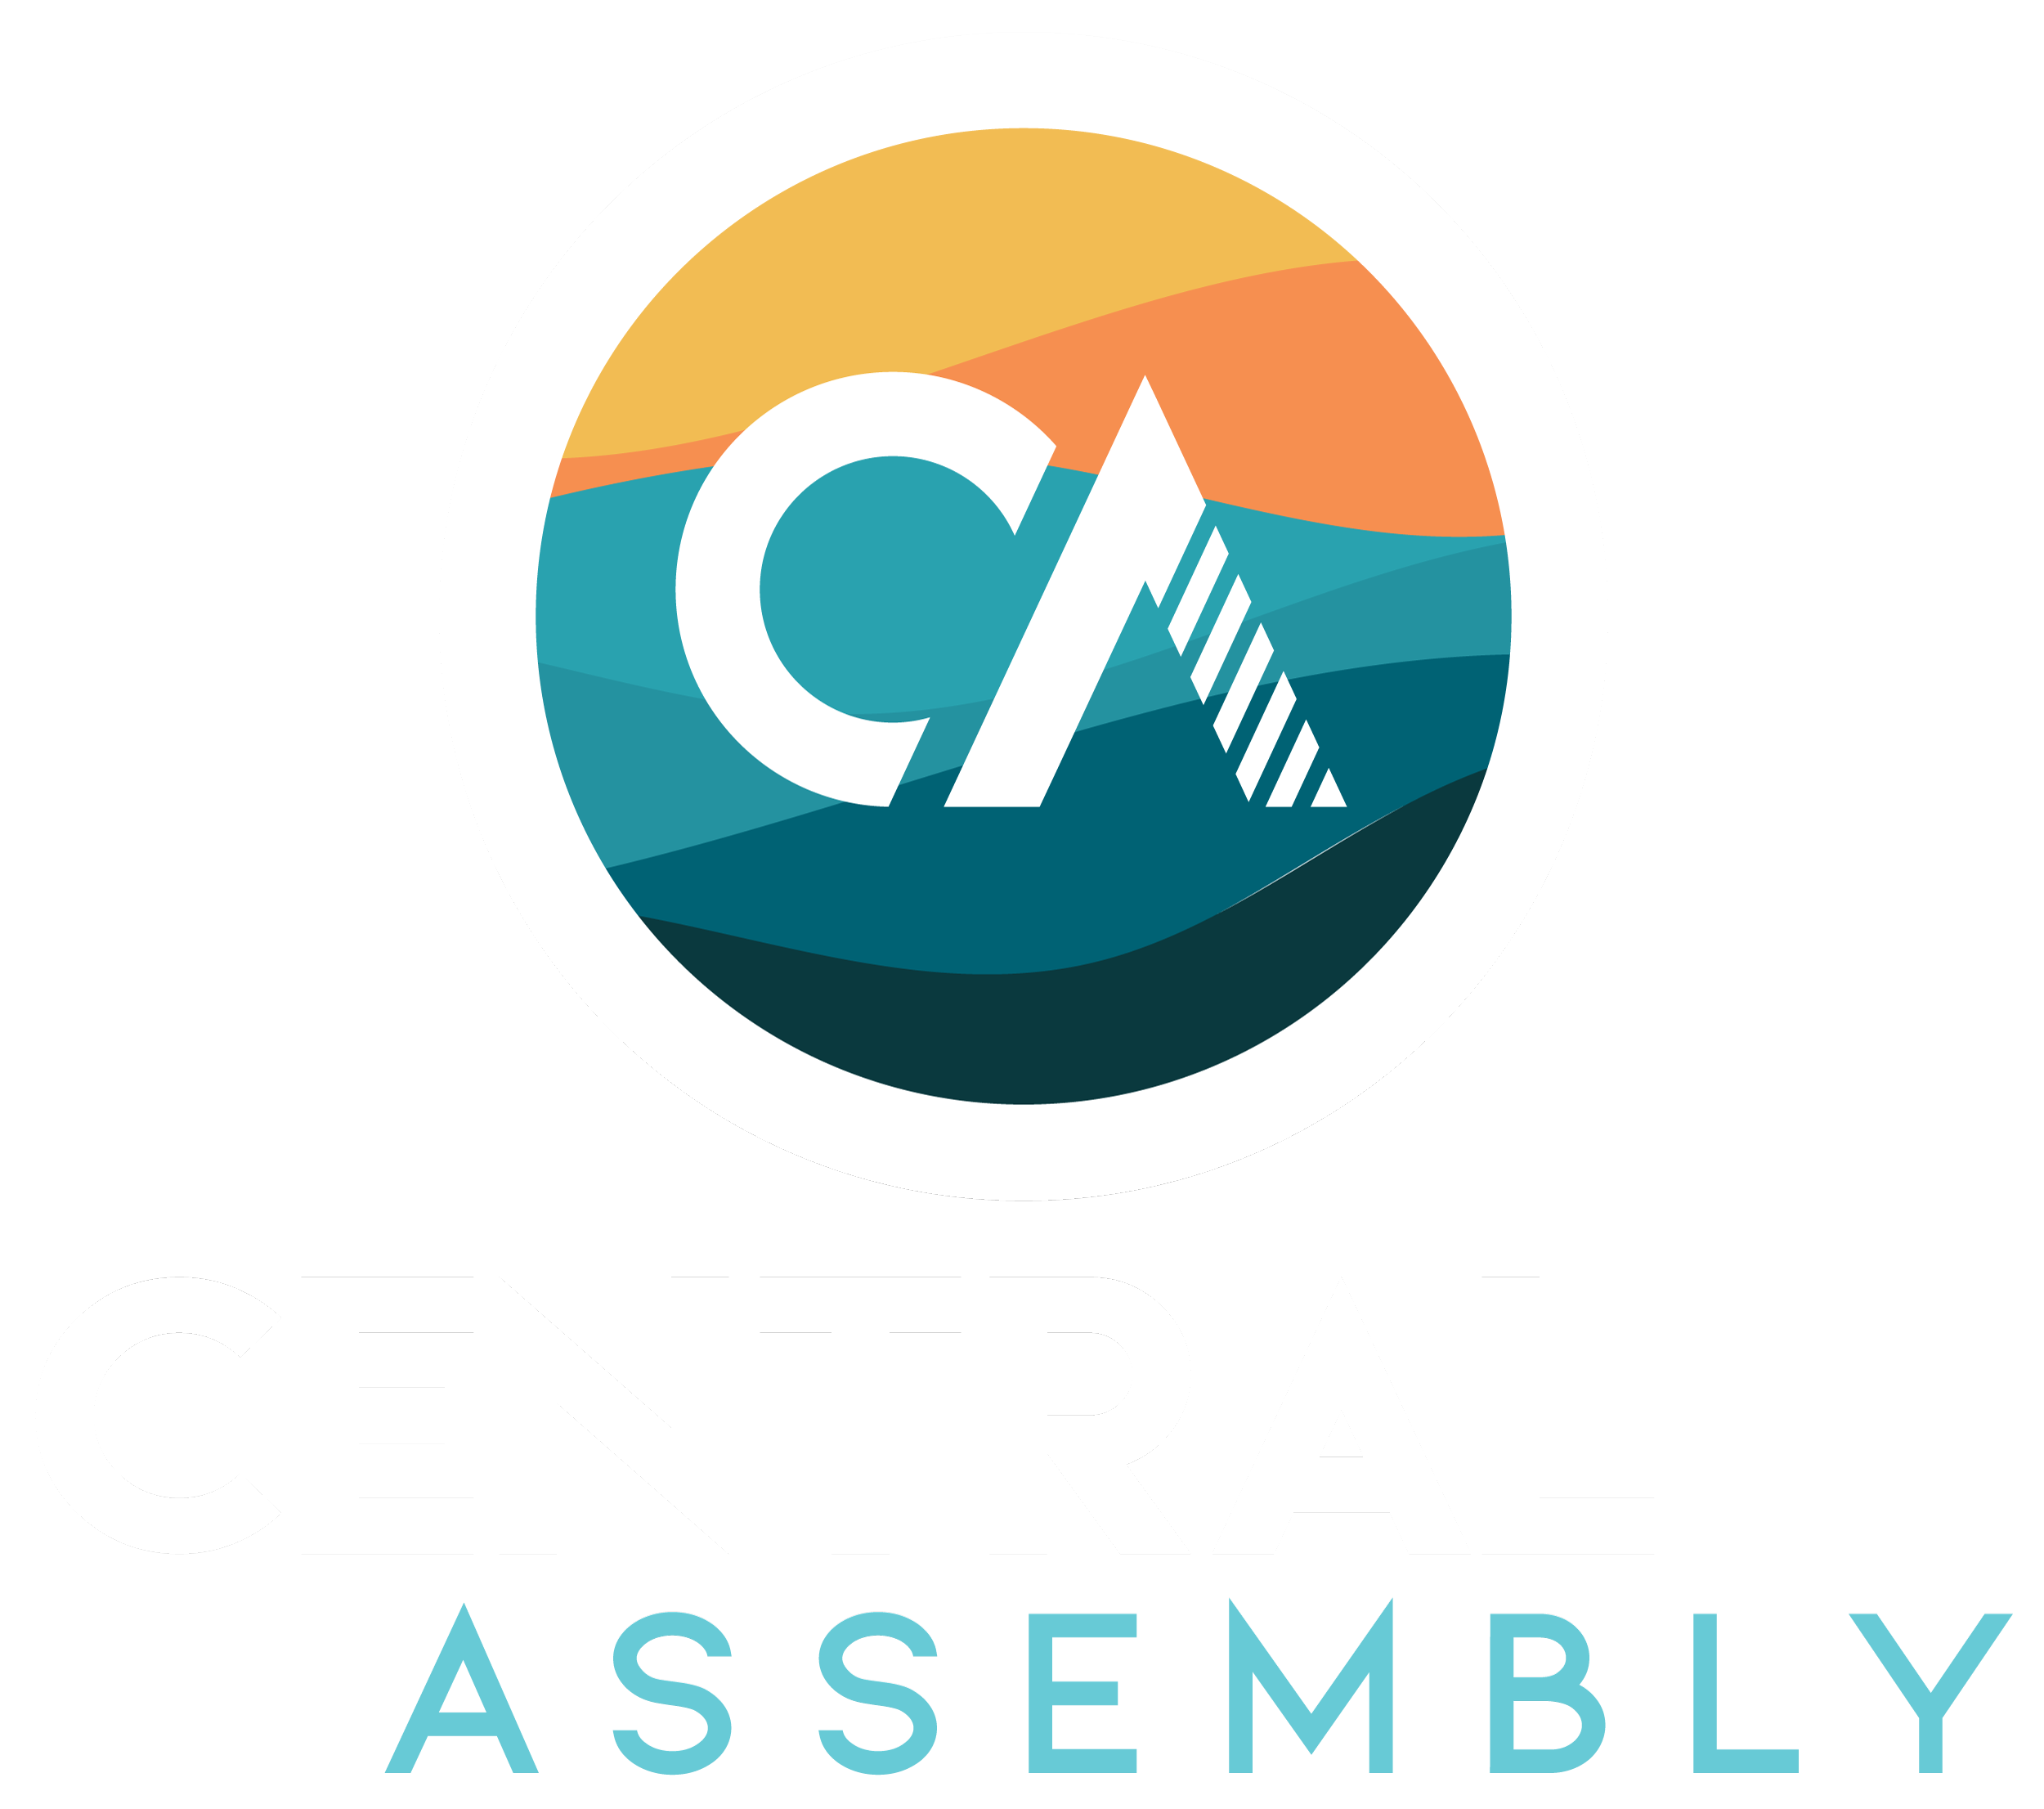 Central Assembly